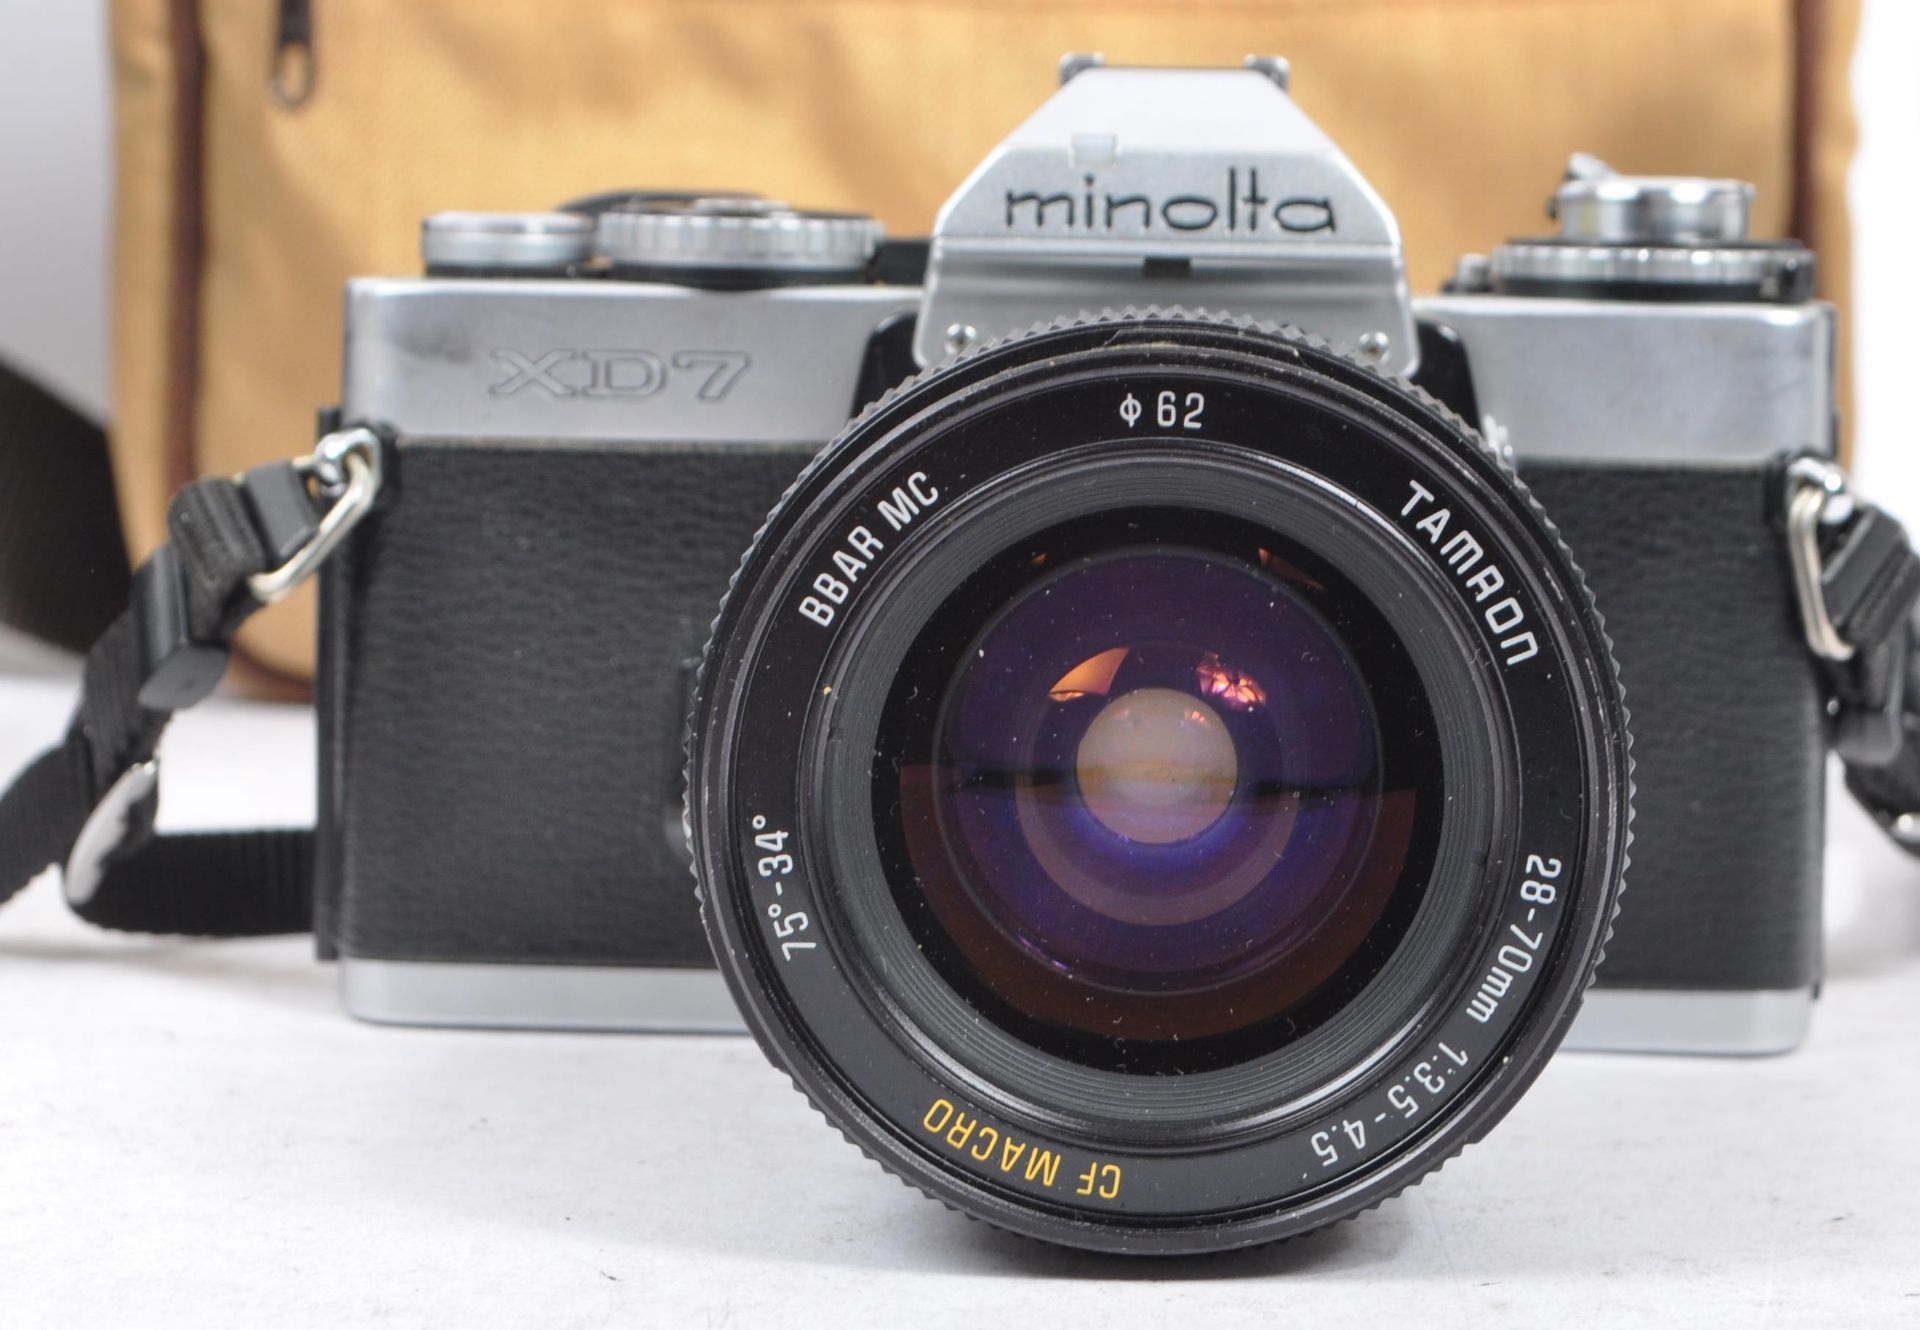 MINOLTA - TWO 20TH CENTURY XD7 CAMERAS AND LENSES - Image 2 of 6